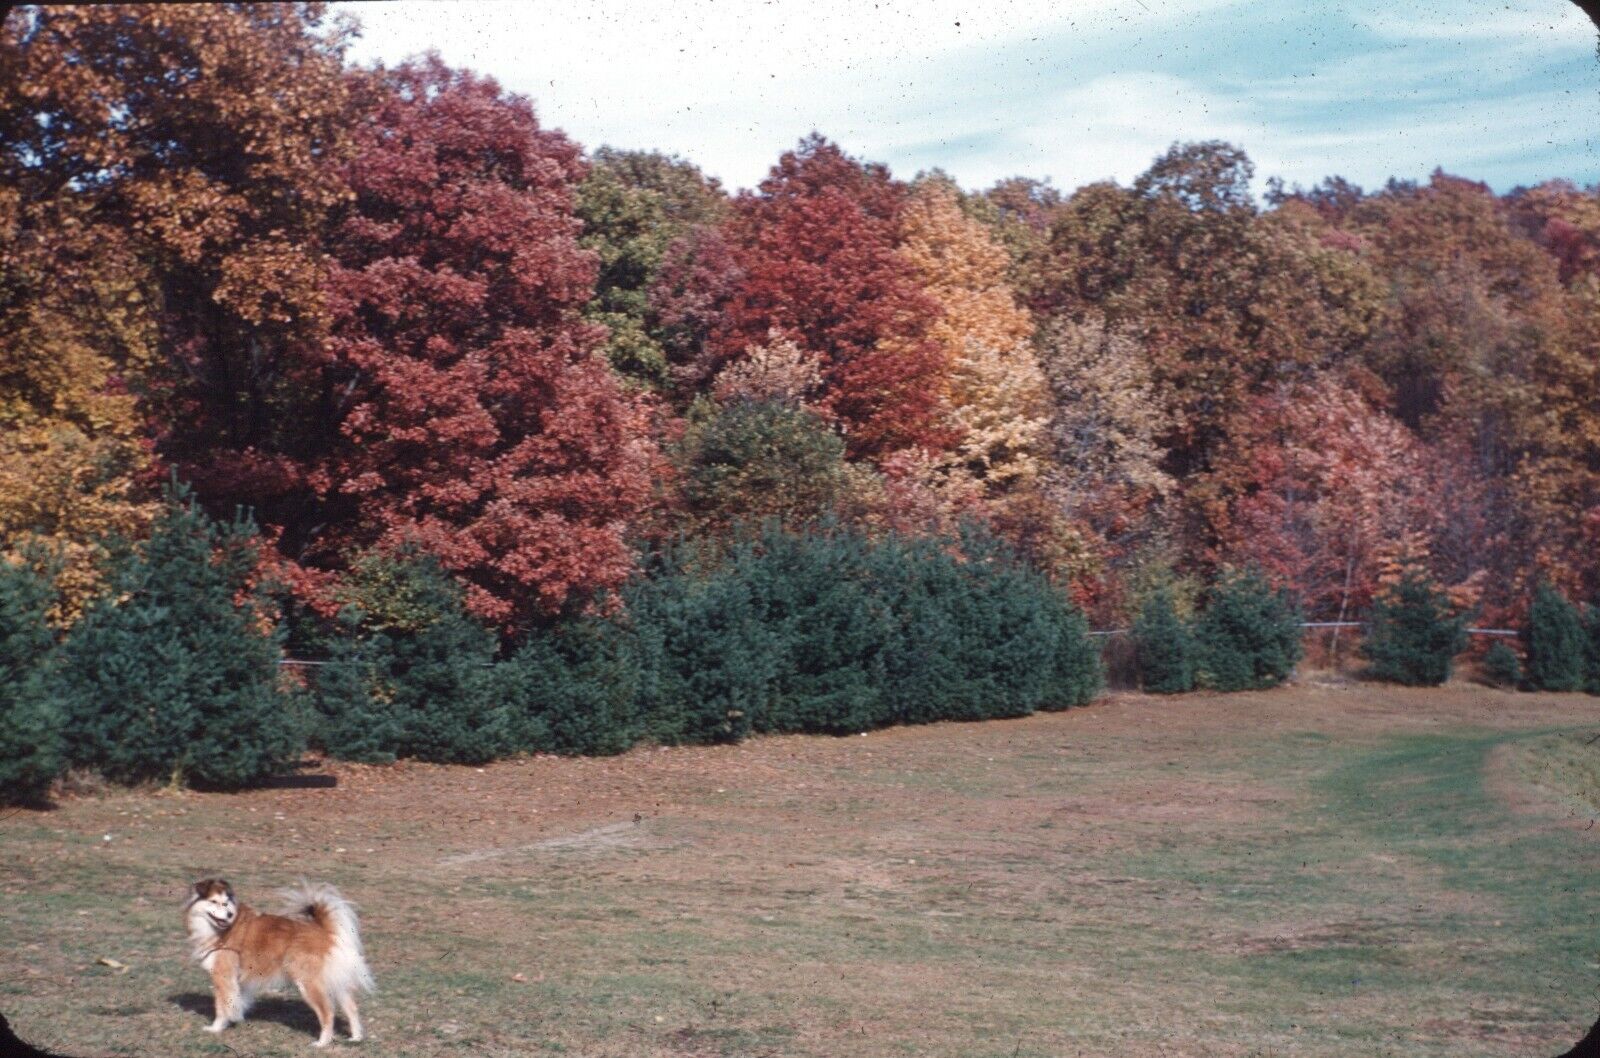 1950s Sheltie Mix Dog Field Fall Autumn Trees Forest 35mm Red Border Slide